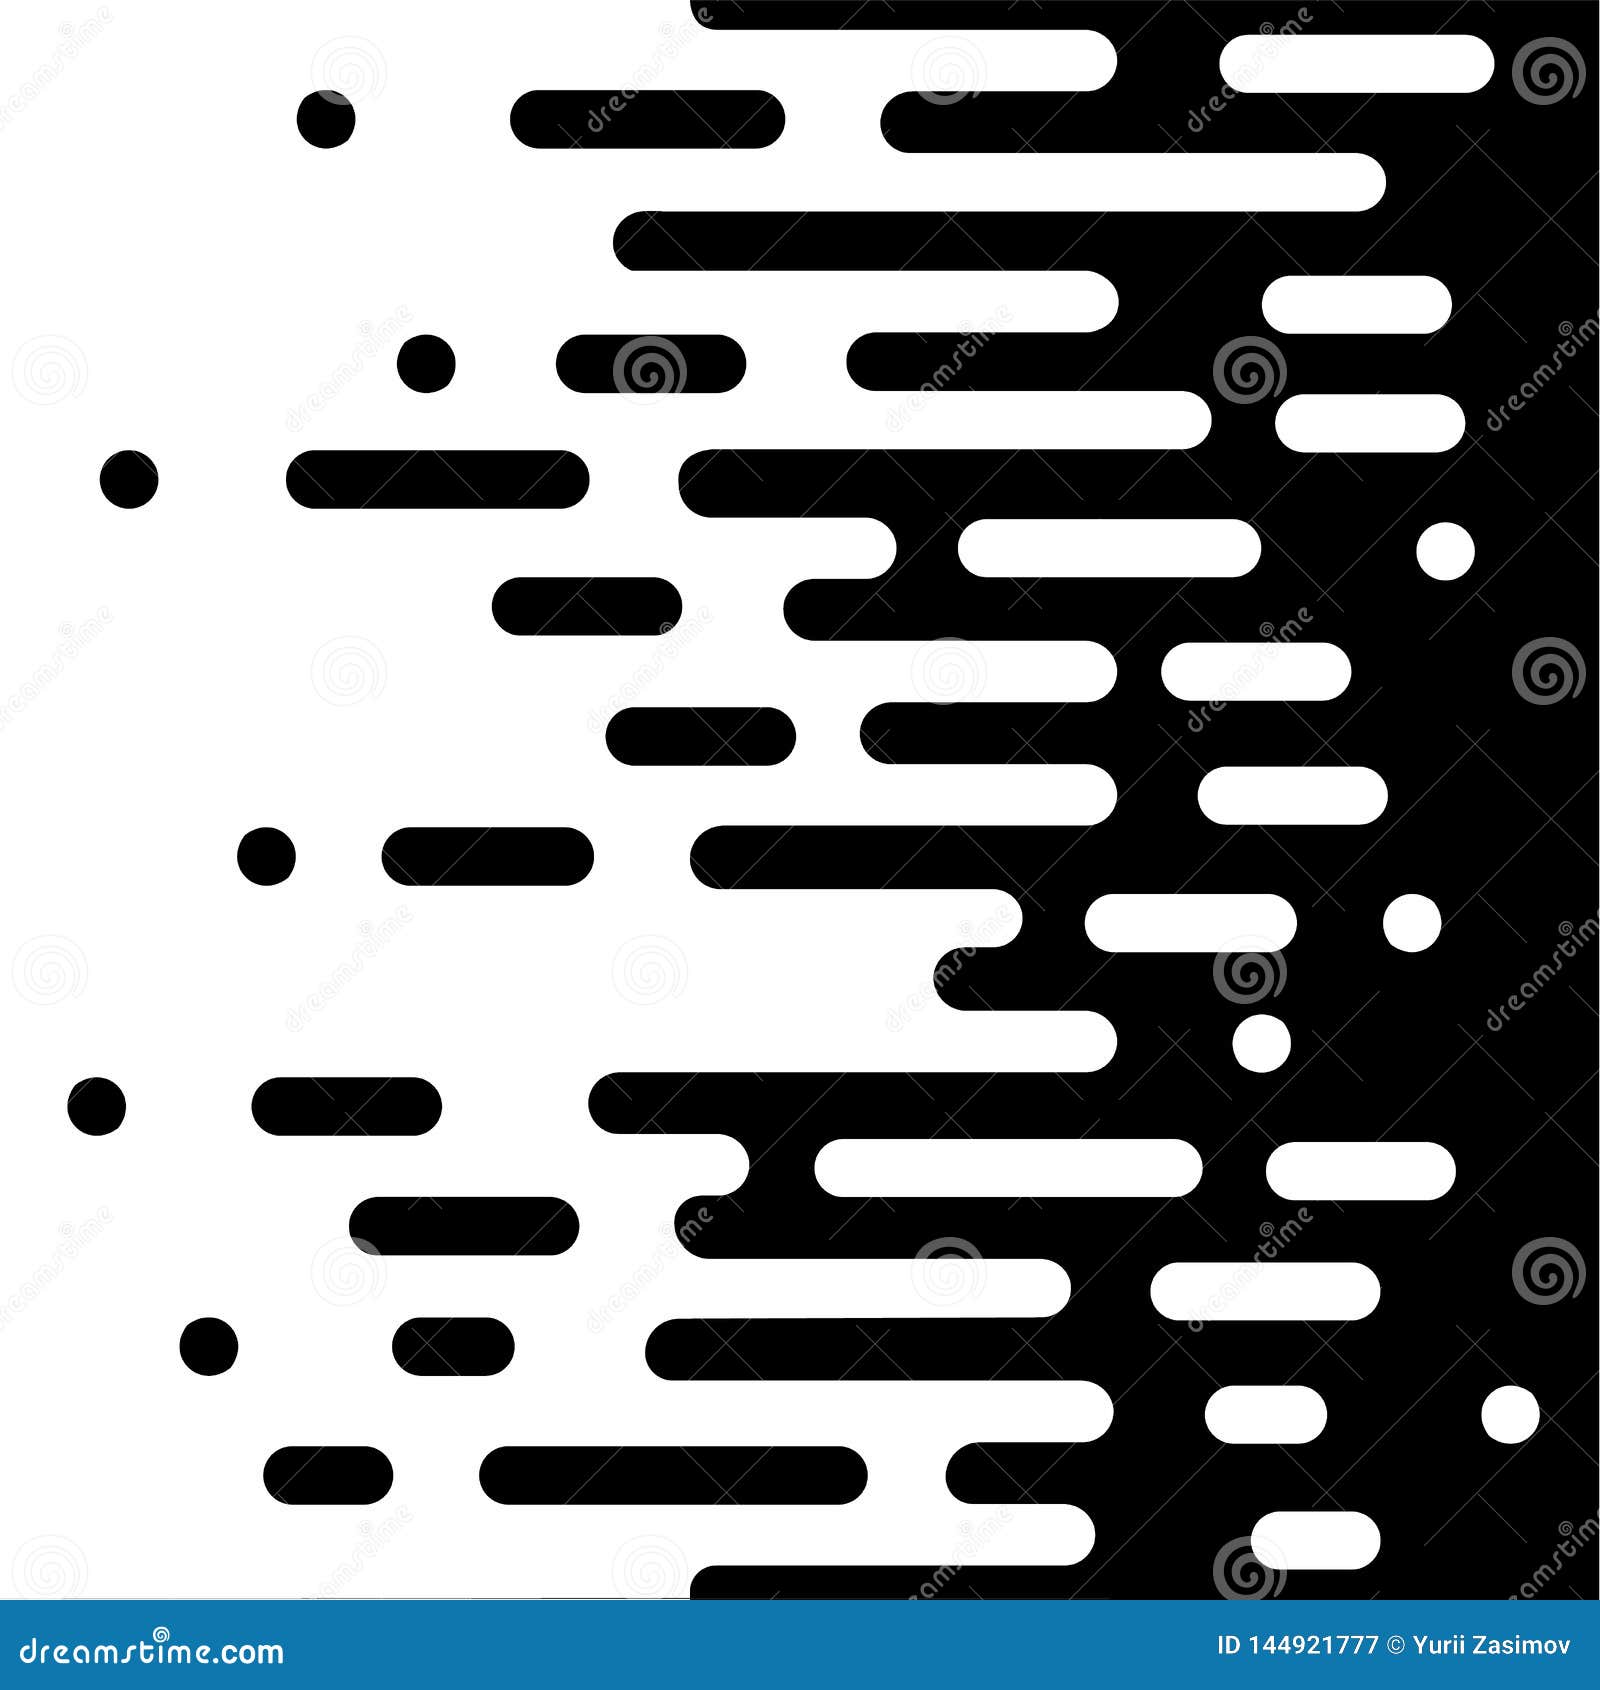 Vector Halftone Transition Abstract Wallpaper Pattern Seamless Images, Photos, Reviews